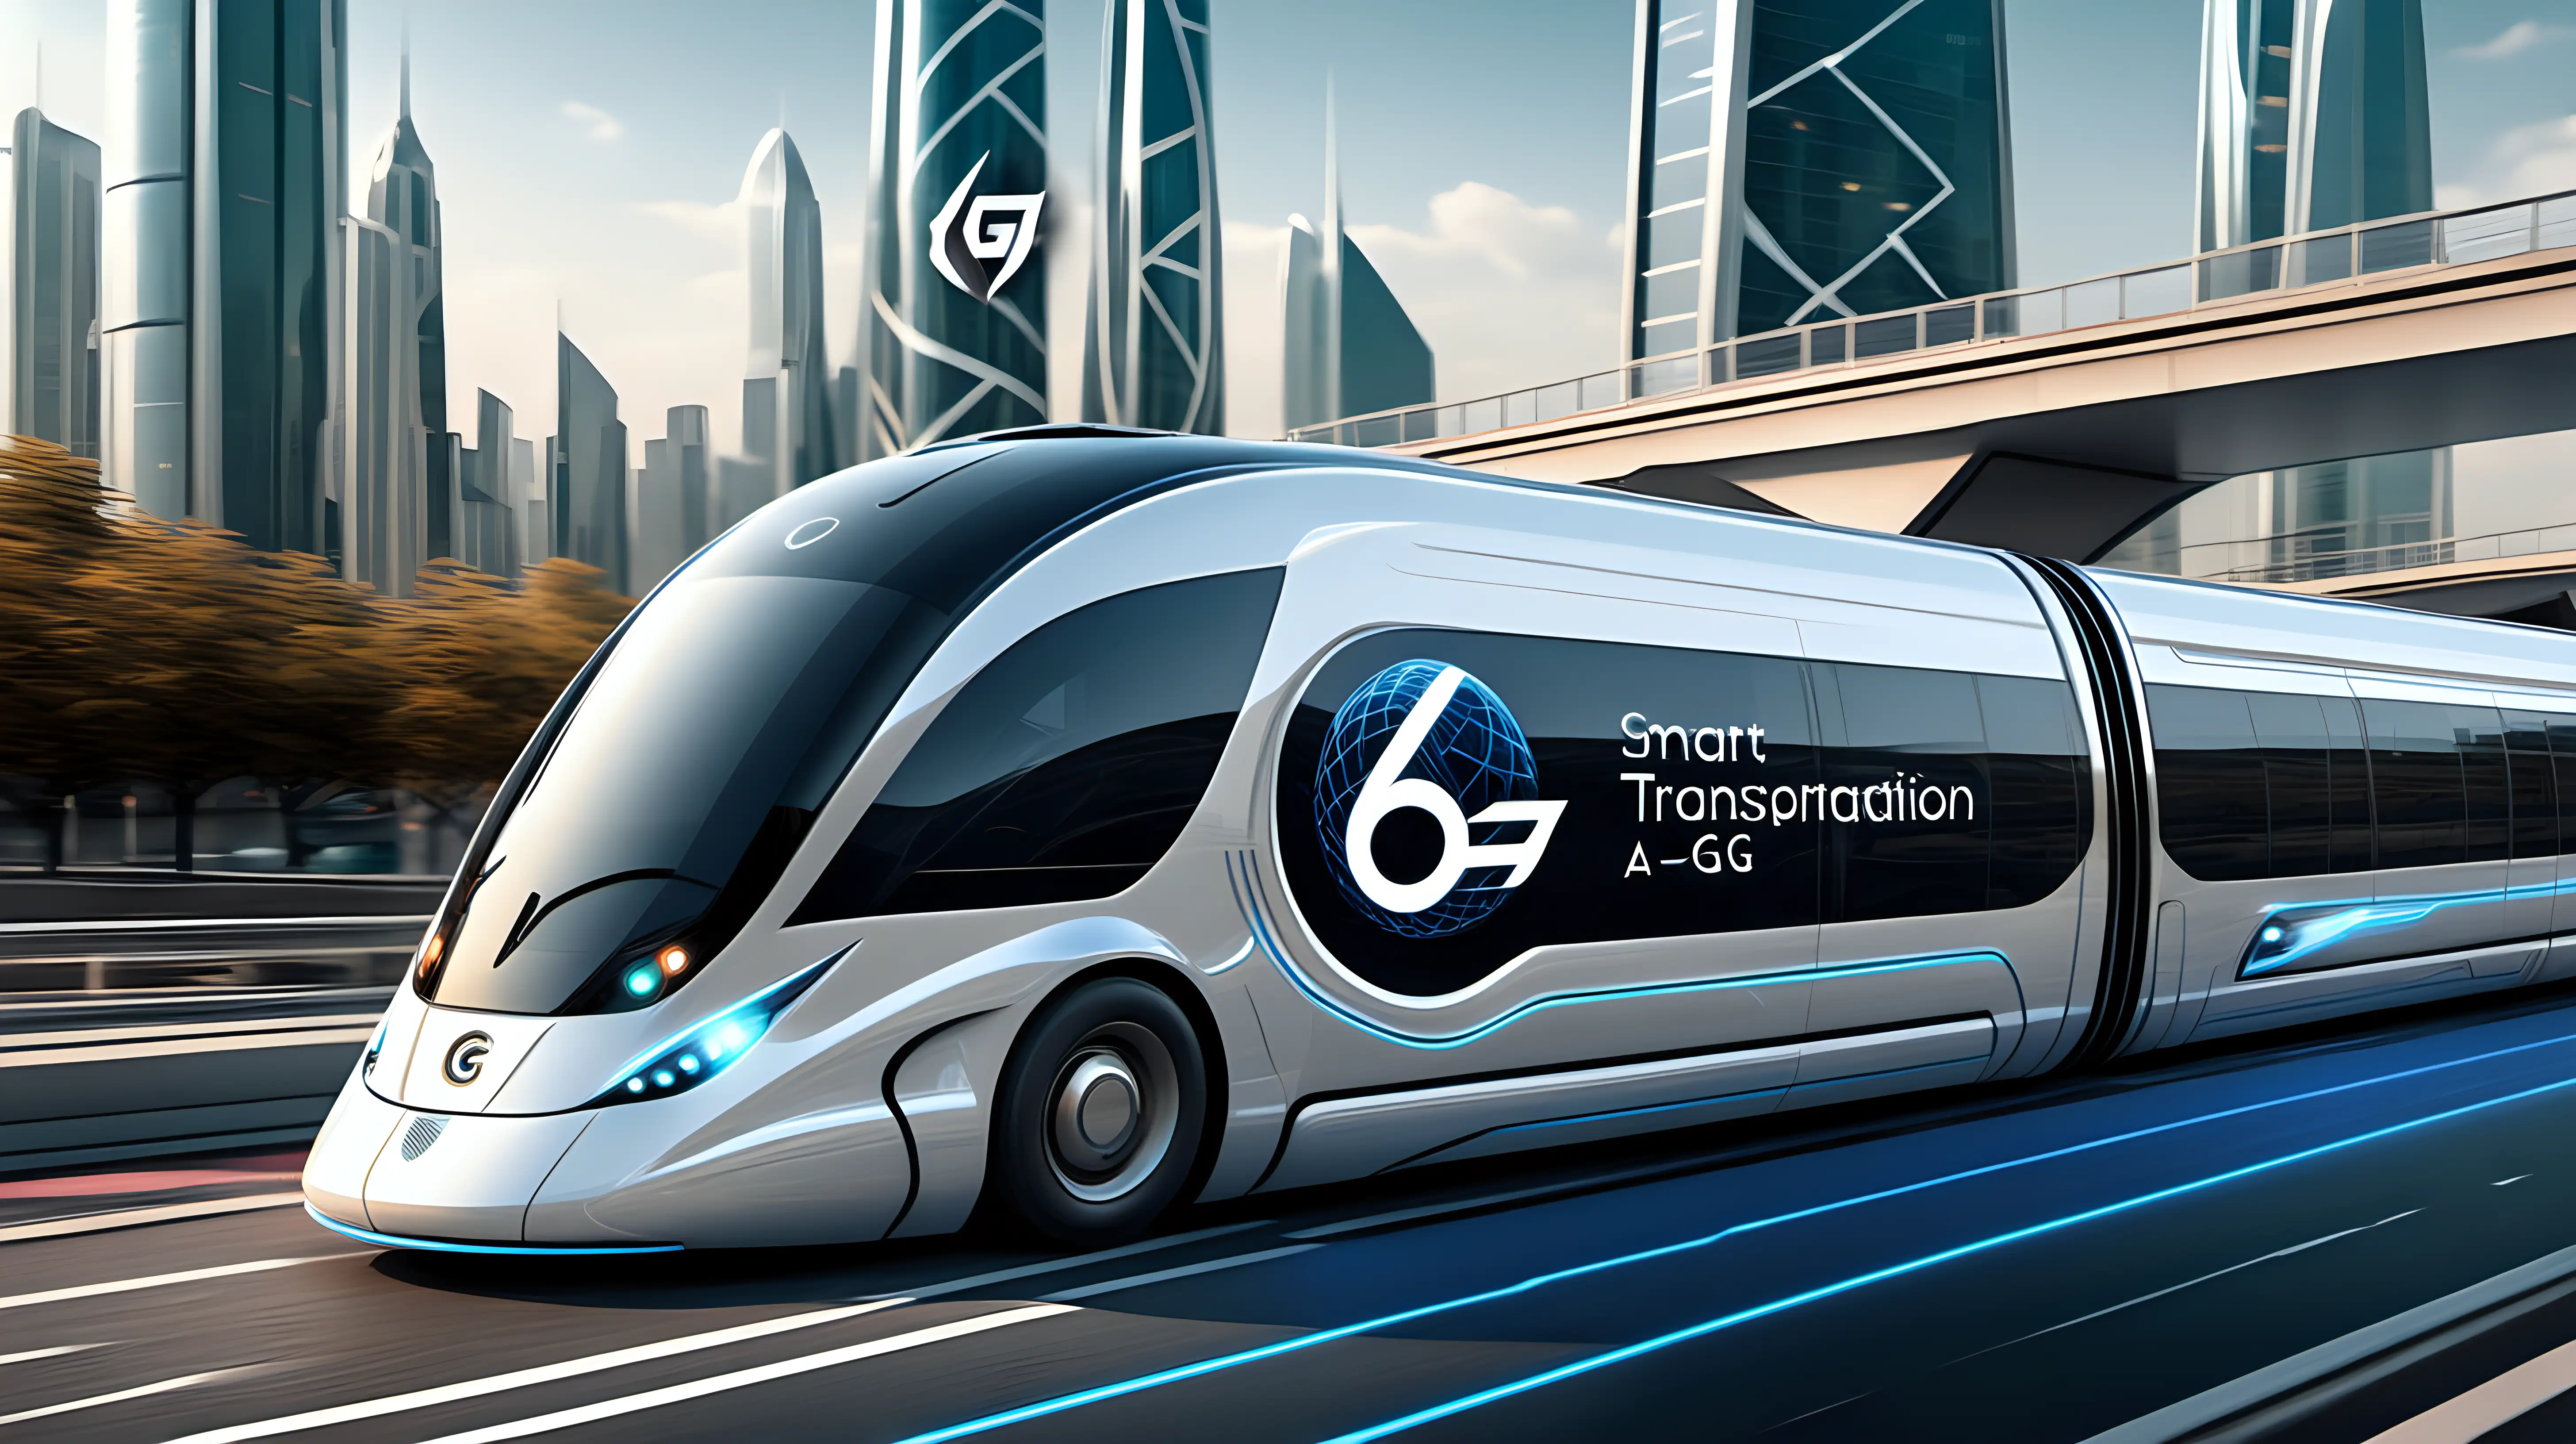 A high-speed transportation system with 6G connectivity, featuring the logo prominently on futuristic vehicles, emphasizing the role of 6G in smart transportation.